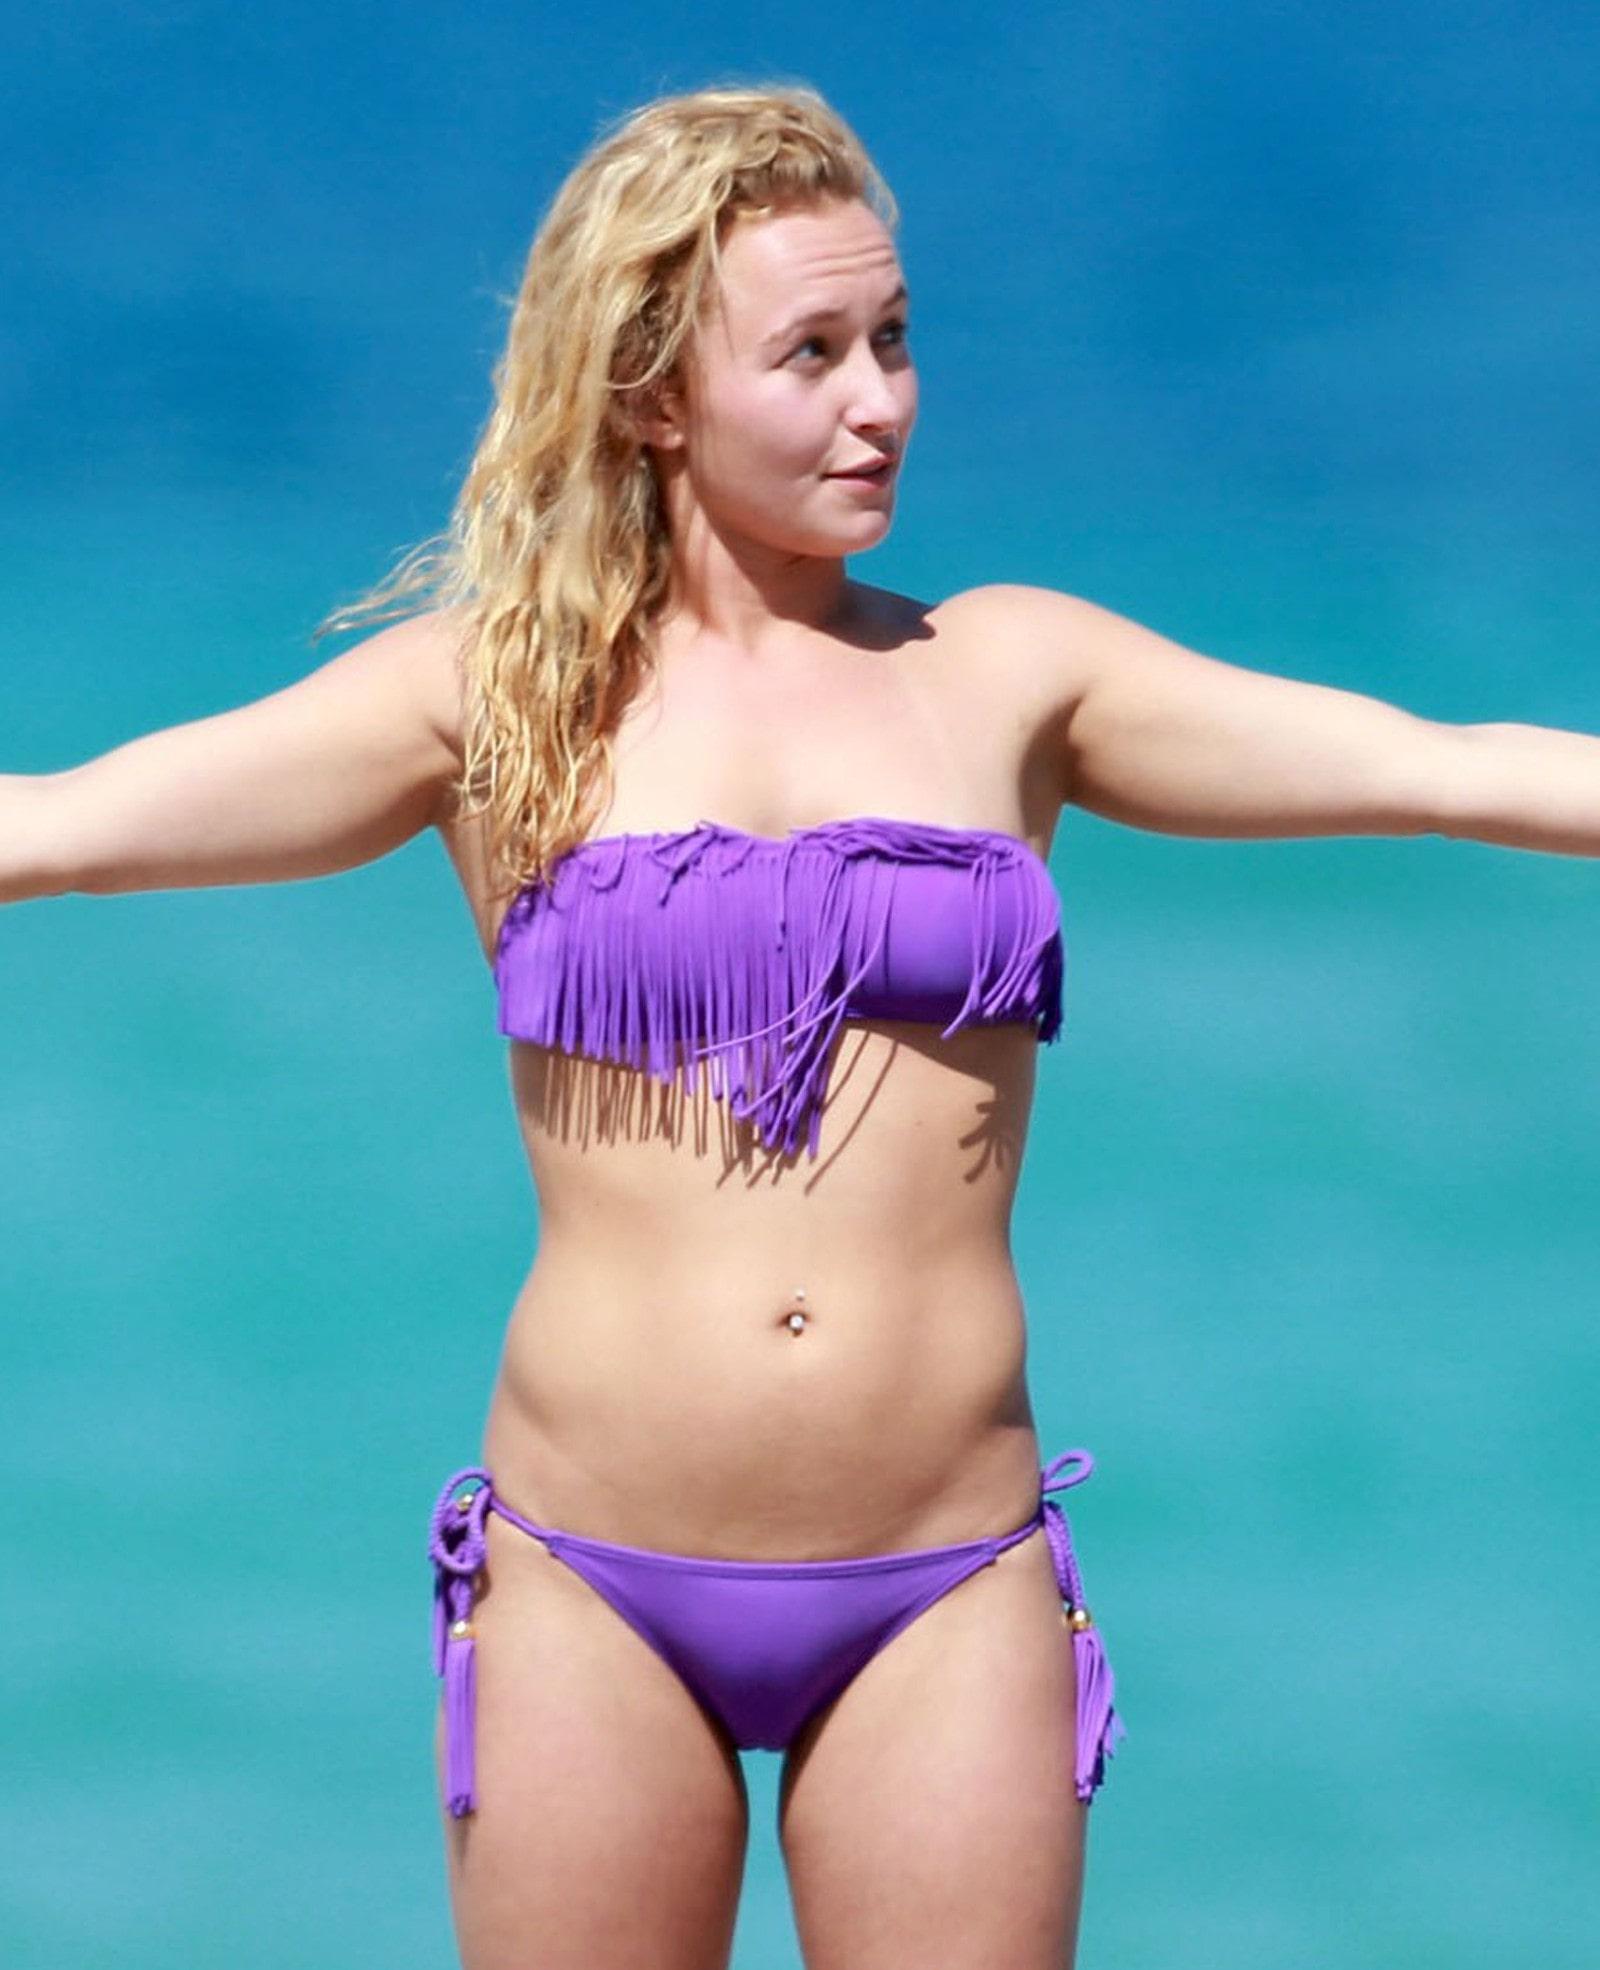 75+ Hot Pictures Of Hayden Panettiere Which Will Rock Your World | Best Of Comic Books